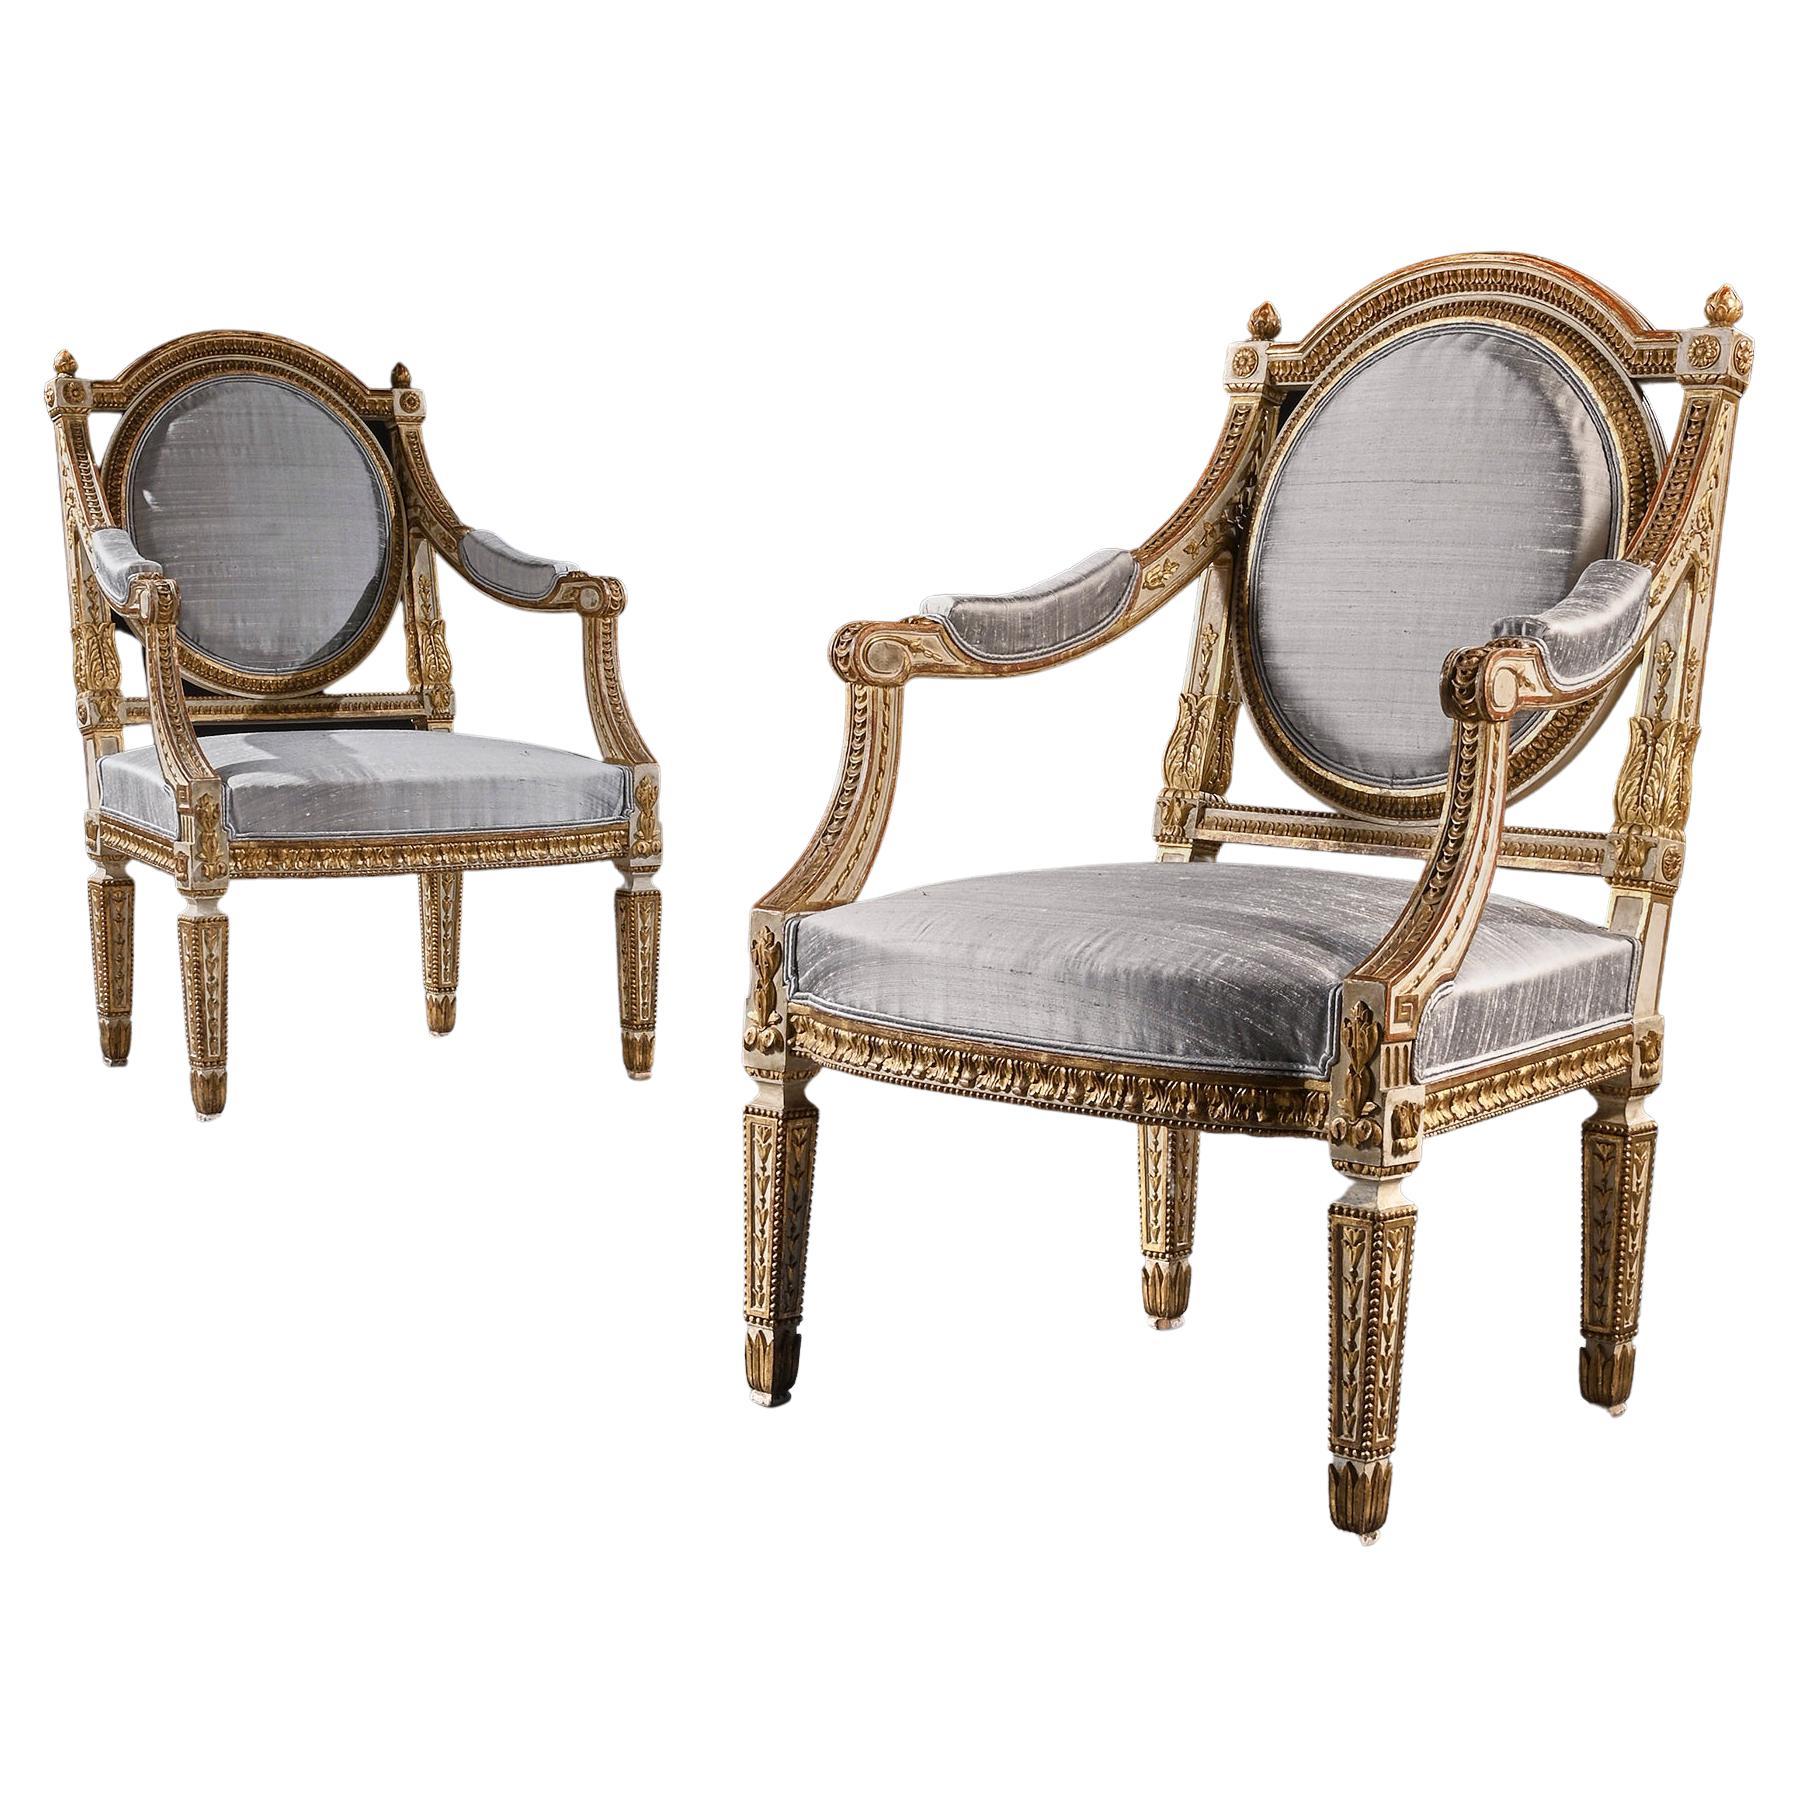 Fine Pair of 19th C Decorative Italian Painted and Parcel Gilt Armchairs of Neo-